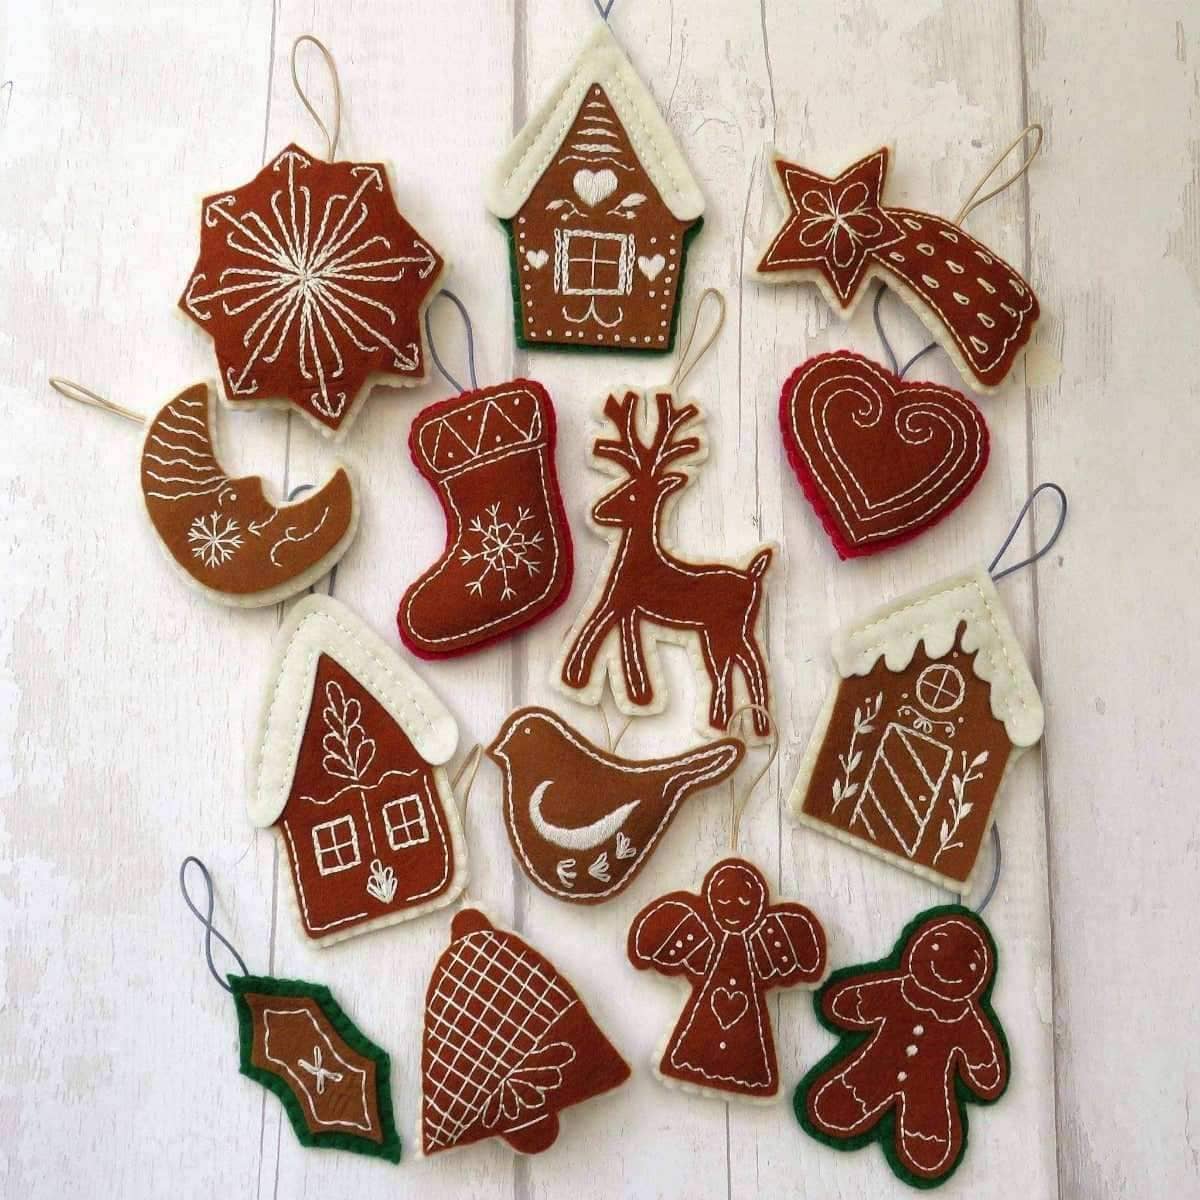 Christmas Gingerbread Decorations , PDF Download , StitchDoodles , christmas, Embroidery, embroidery hoop, embroidery hoop kit, Embroidery Kit, embroidery kit for adults, embroidery kit fro beginners, embroidery kits for adults, embroidery kits for beginners, embroidery pattern, hand embroidery, hand embroidery fabric, hand embroidery seat frame, modern embroidery kits, nurge embroidery hoop, PDF pattern, Printed Pattern , StitchDoodles , shop.stitchdoodles.com